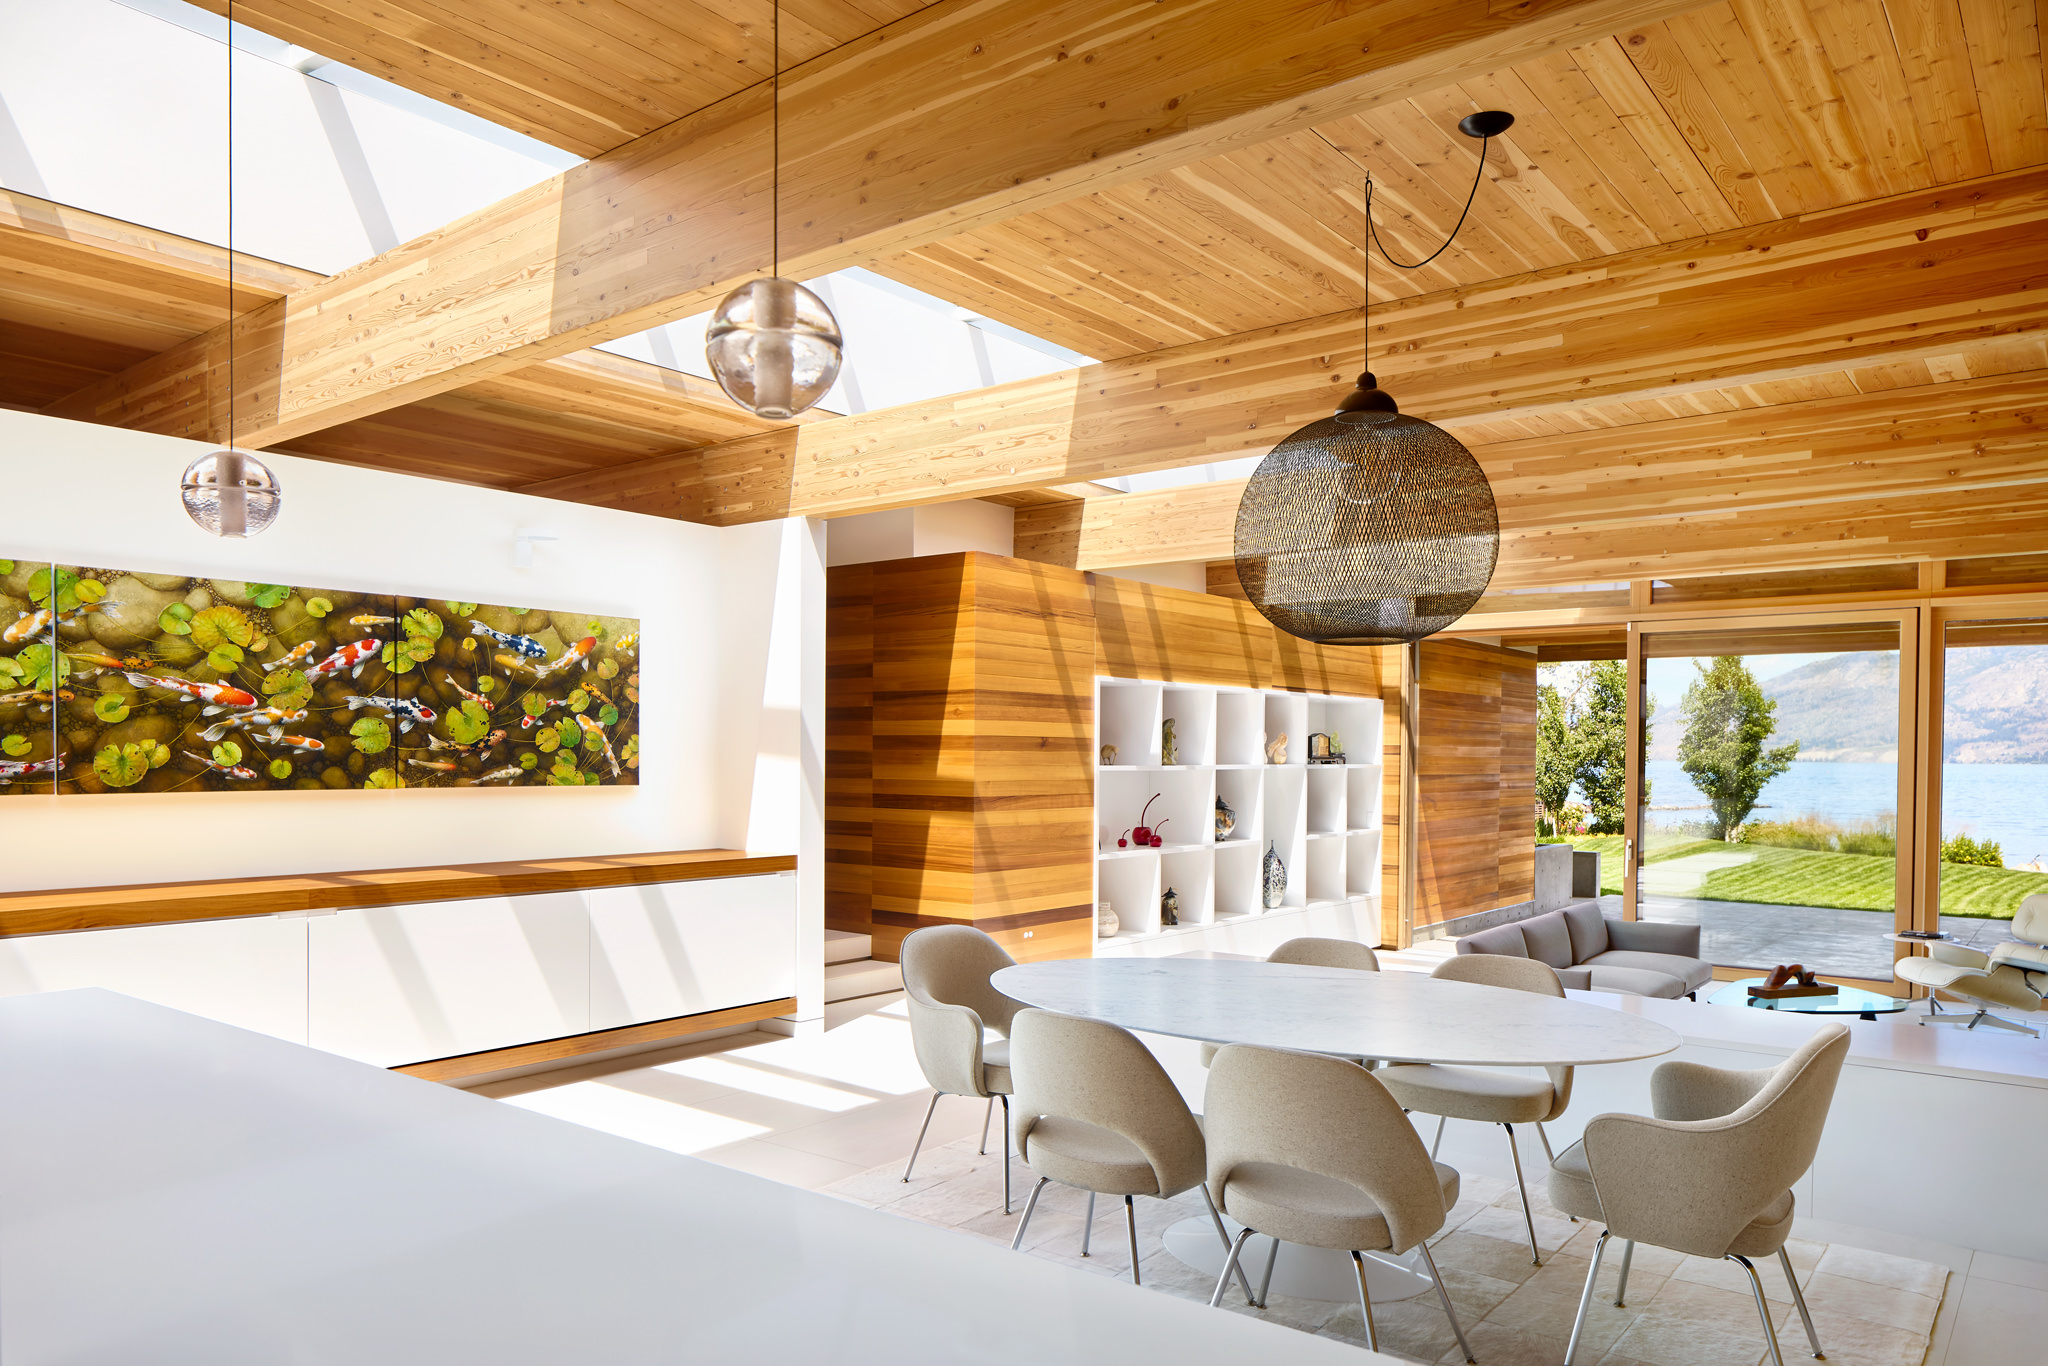 Interior view of bright modern home with wood materials and art looking out to lawn and lake